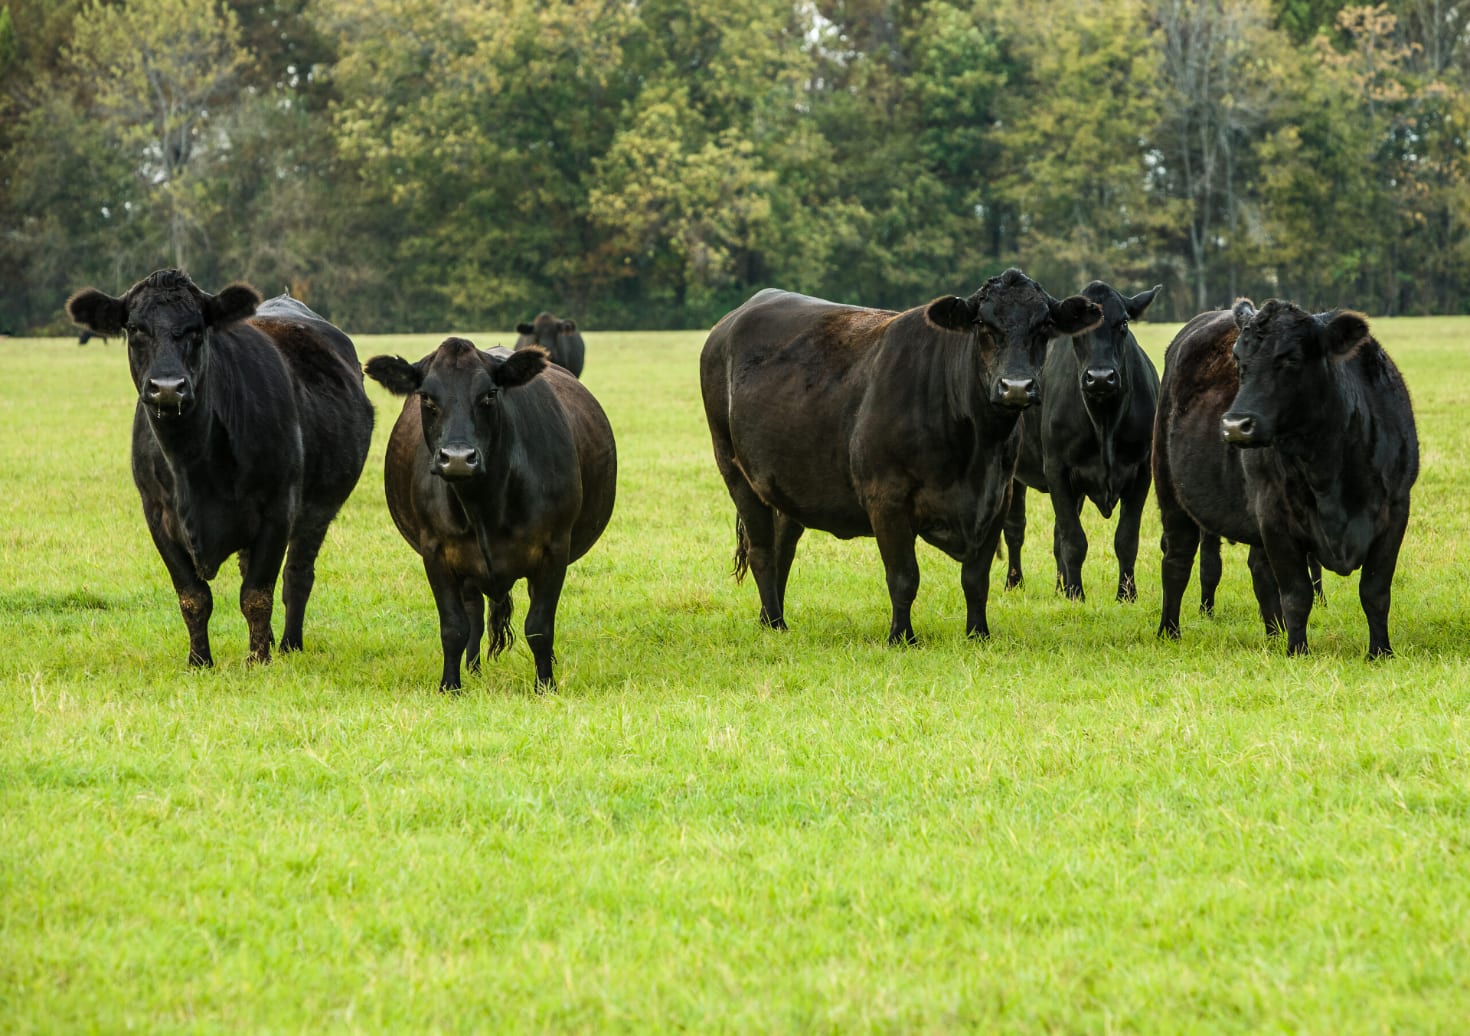 A photo of cows in a pasture.